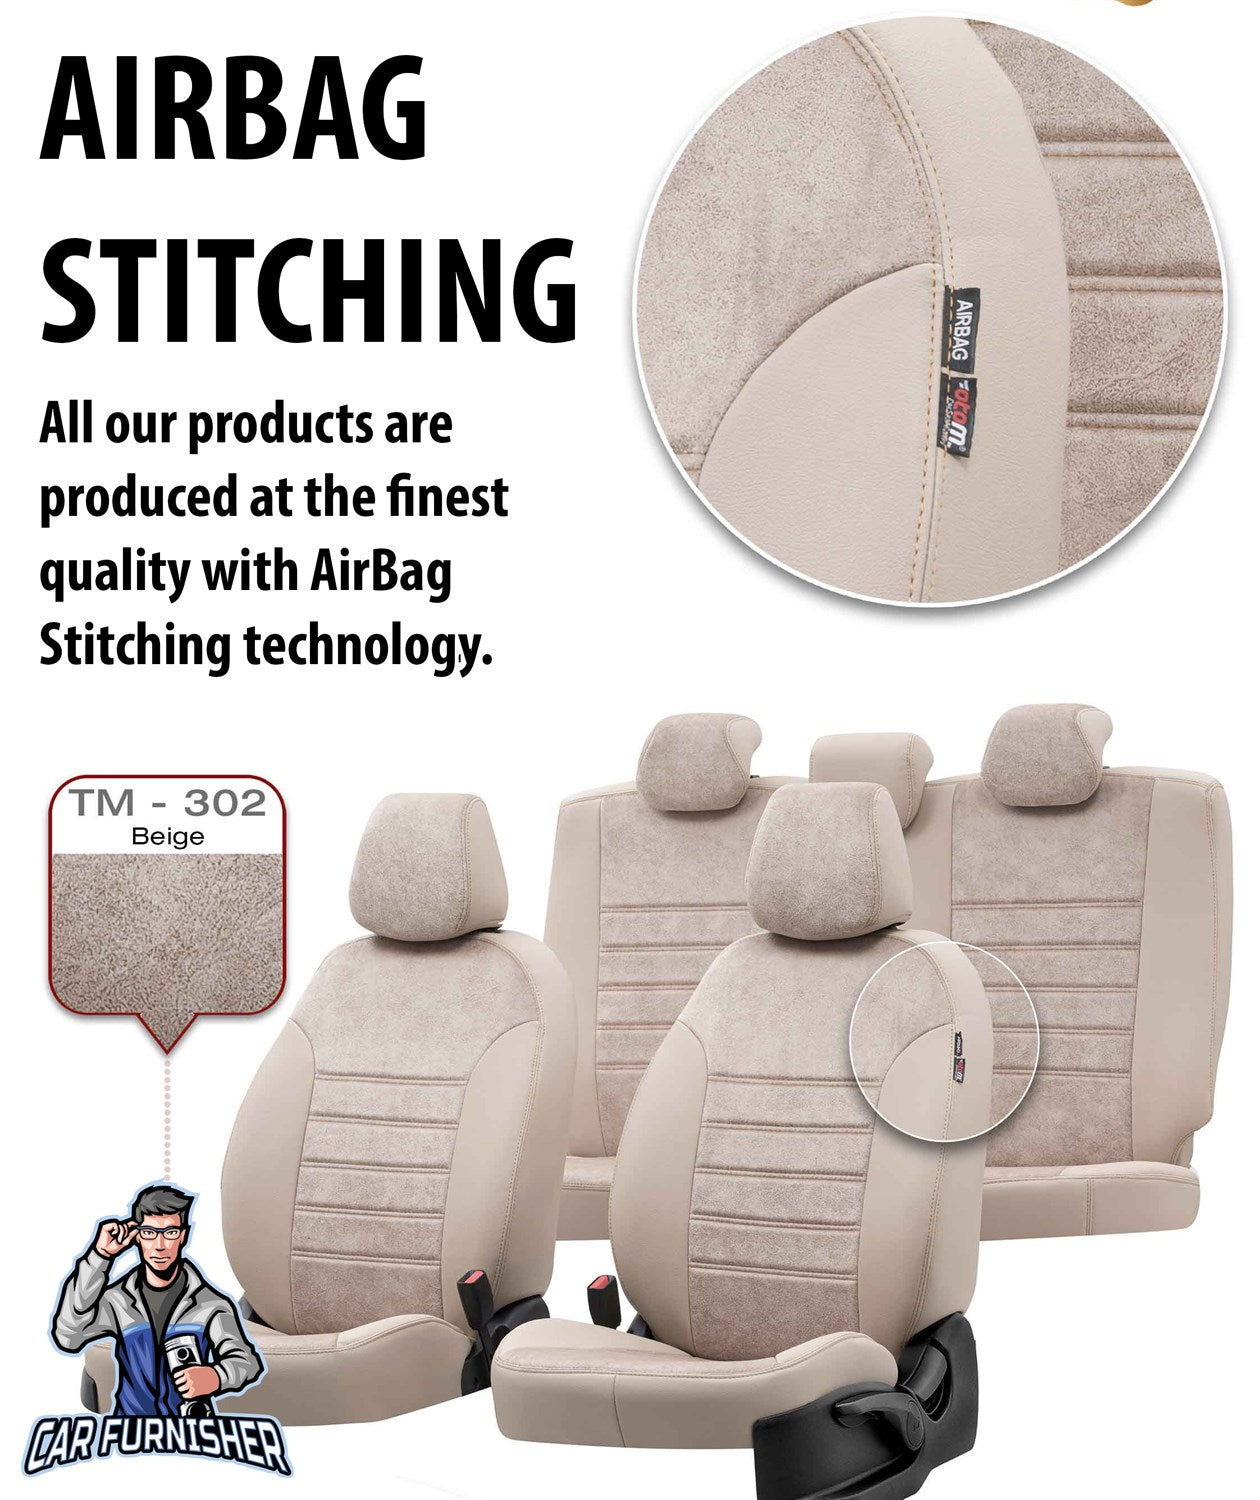 Seat Ateca Seat Covers Milano Suede Design Smoked Black Leather & Suede Fabric